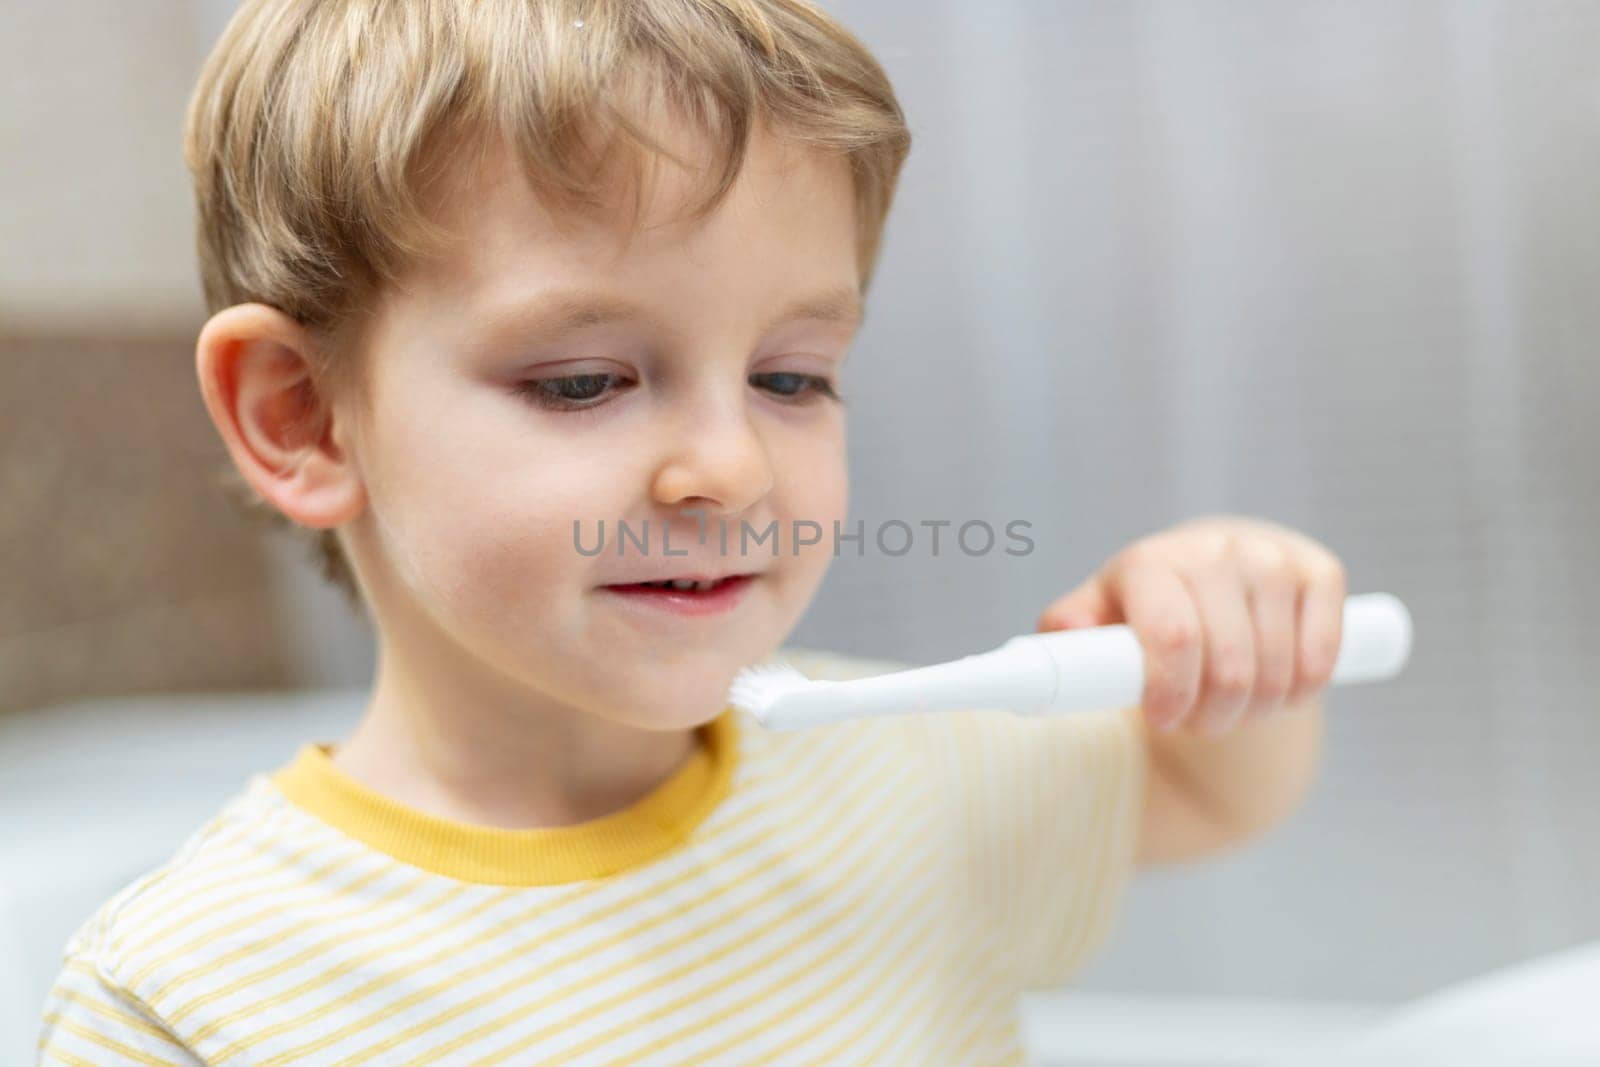 Boy Brushing Teeth with Electric Toothbrush by andreyz